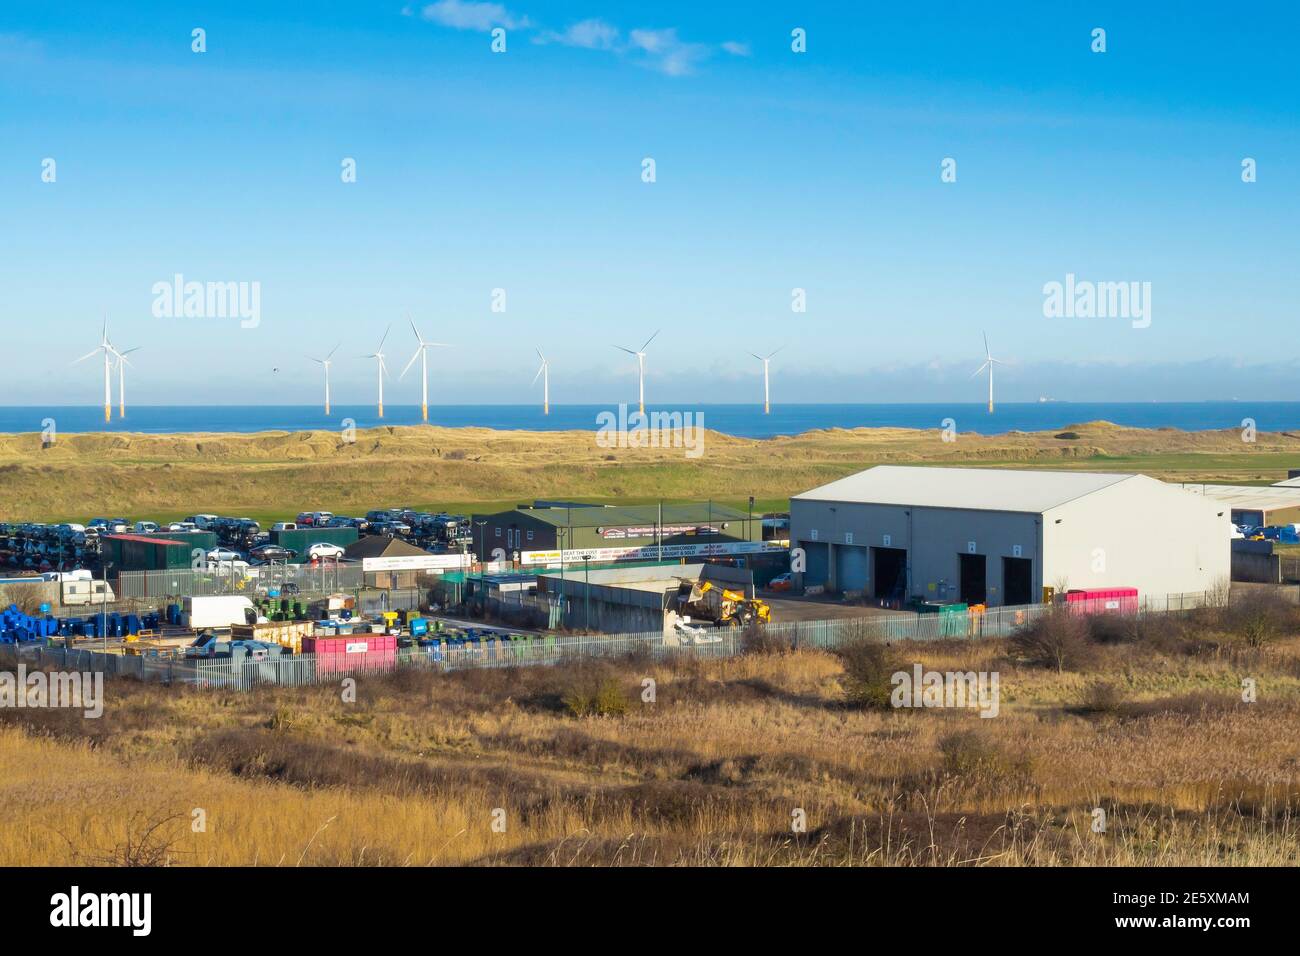 A recycling plant in Warrenby light industrial estate Redcar Cleveland North Yorkshire England UK with a windfarm and golf course behind Stock Photo